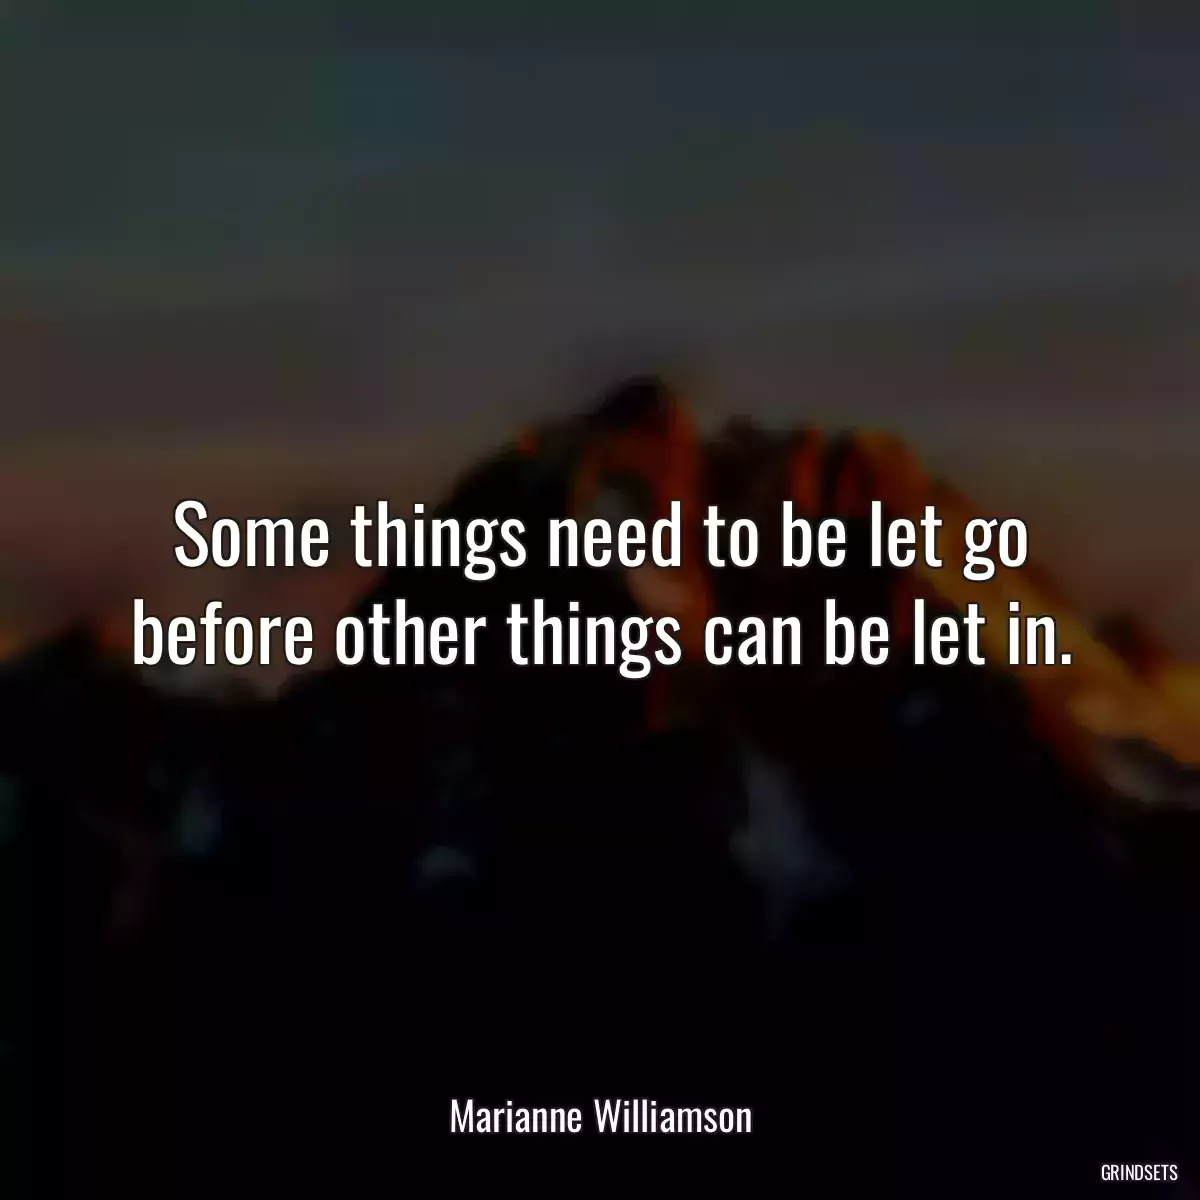 Some things need to be let go before other things can be let in.